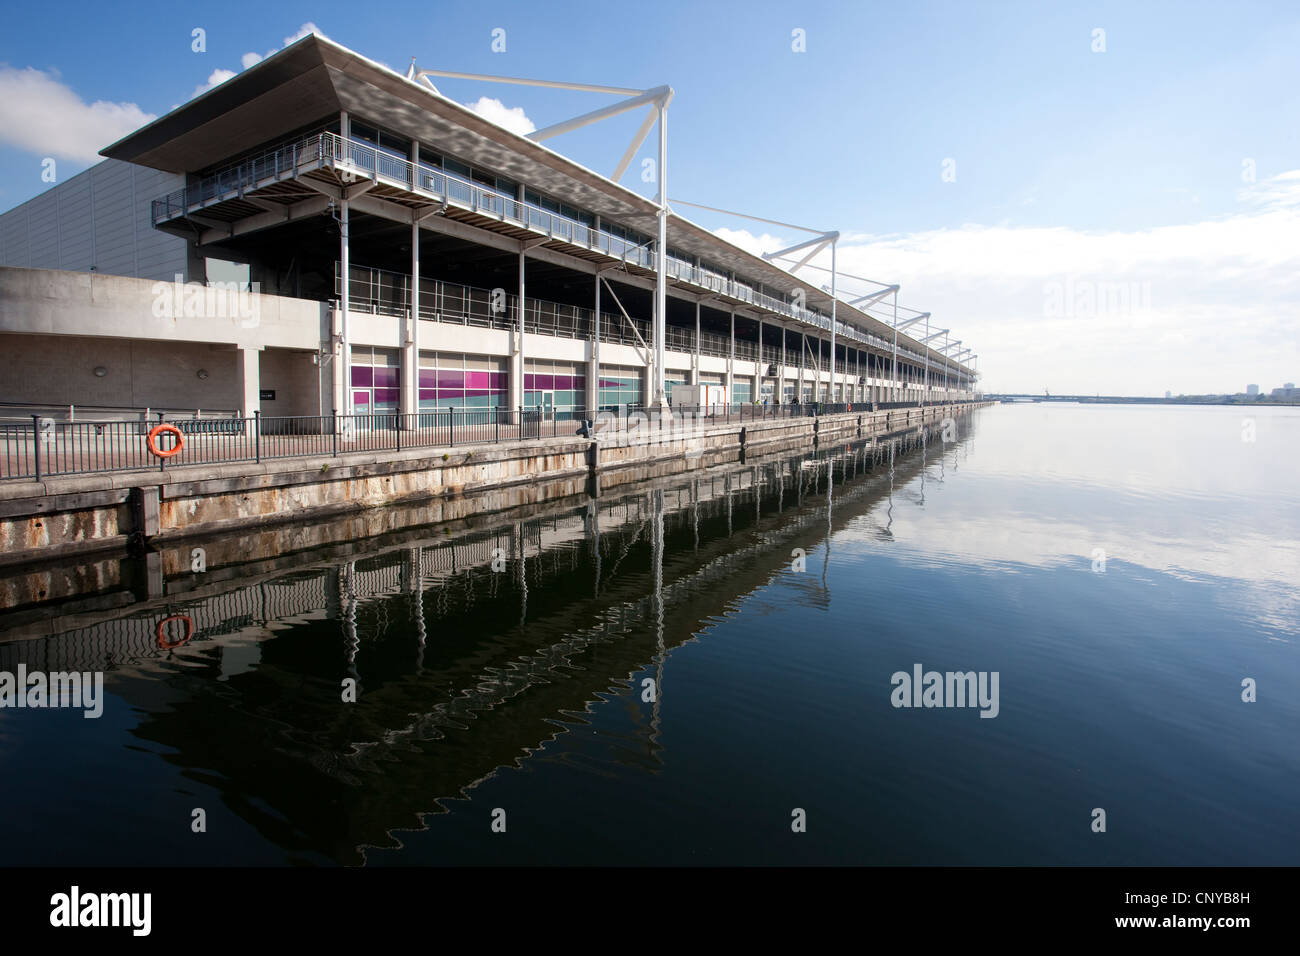 ExCel London International exhibition and Convention Centre Venue East London. Stock Photo